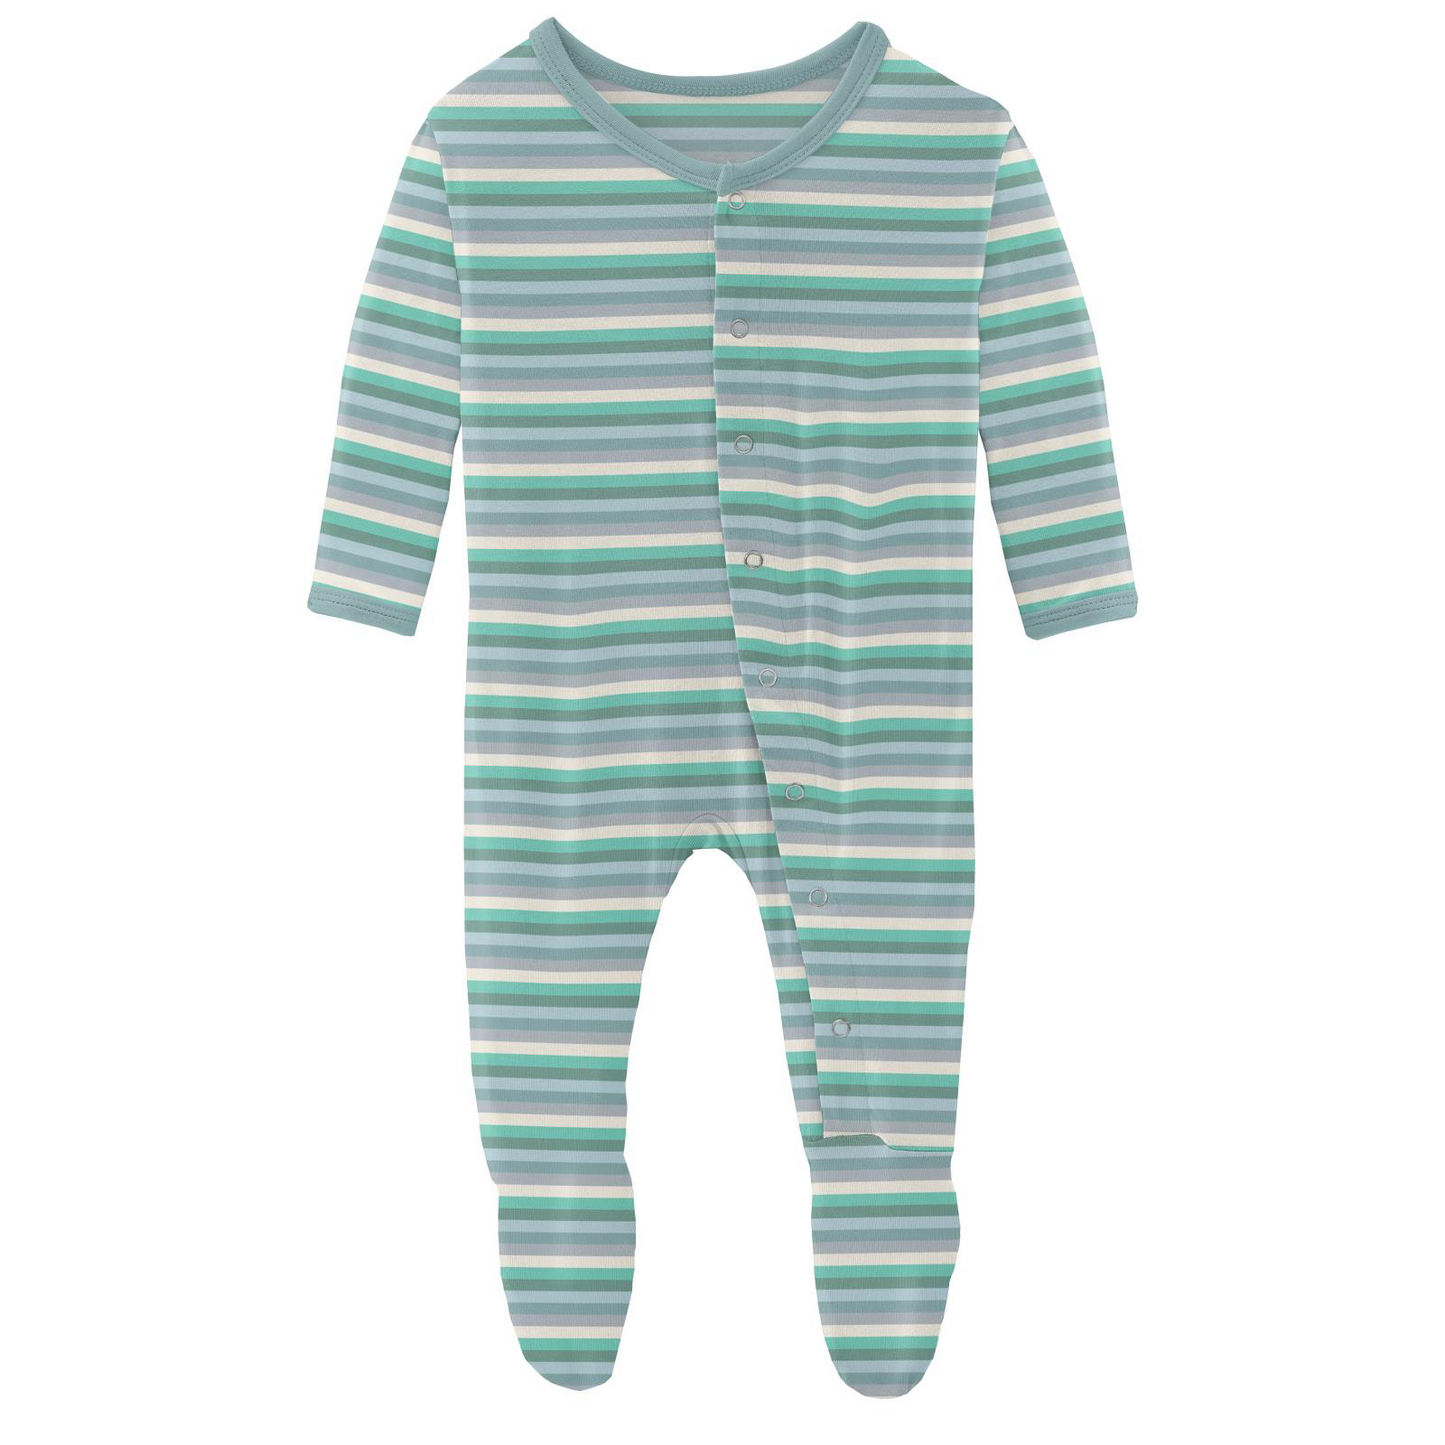 Print Footie with Snaps in April Showers Stripe